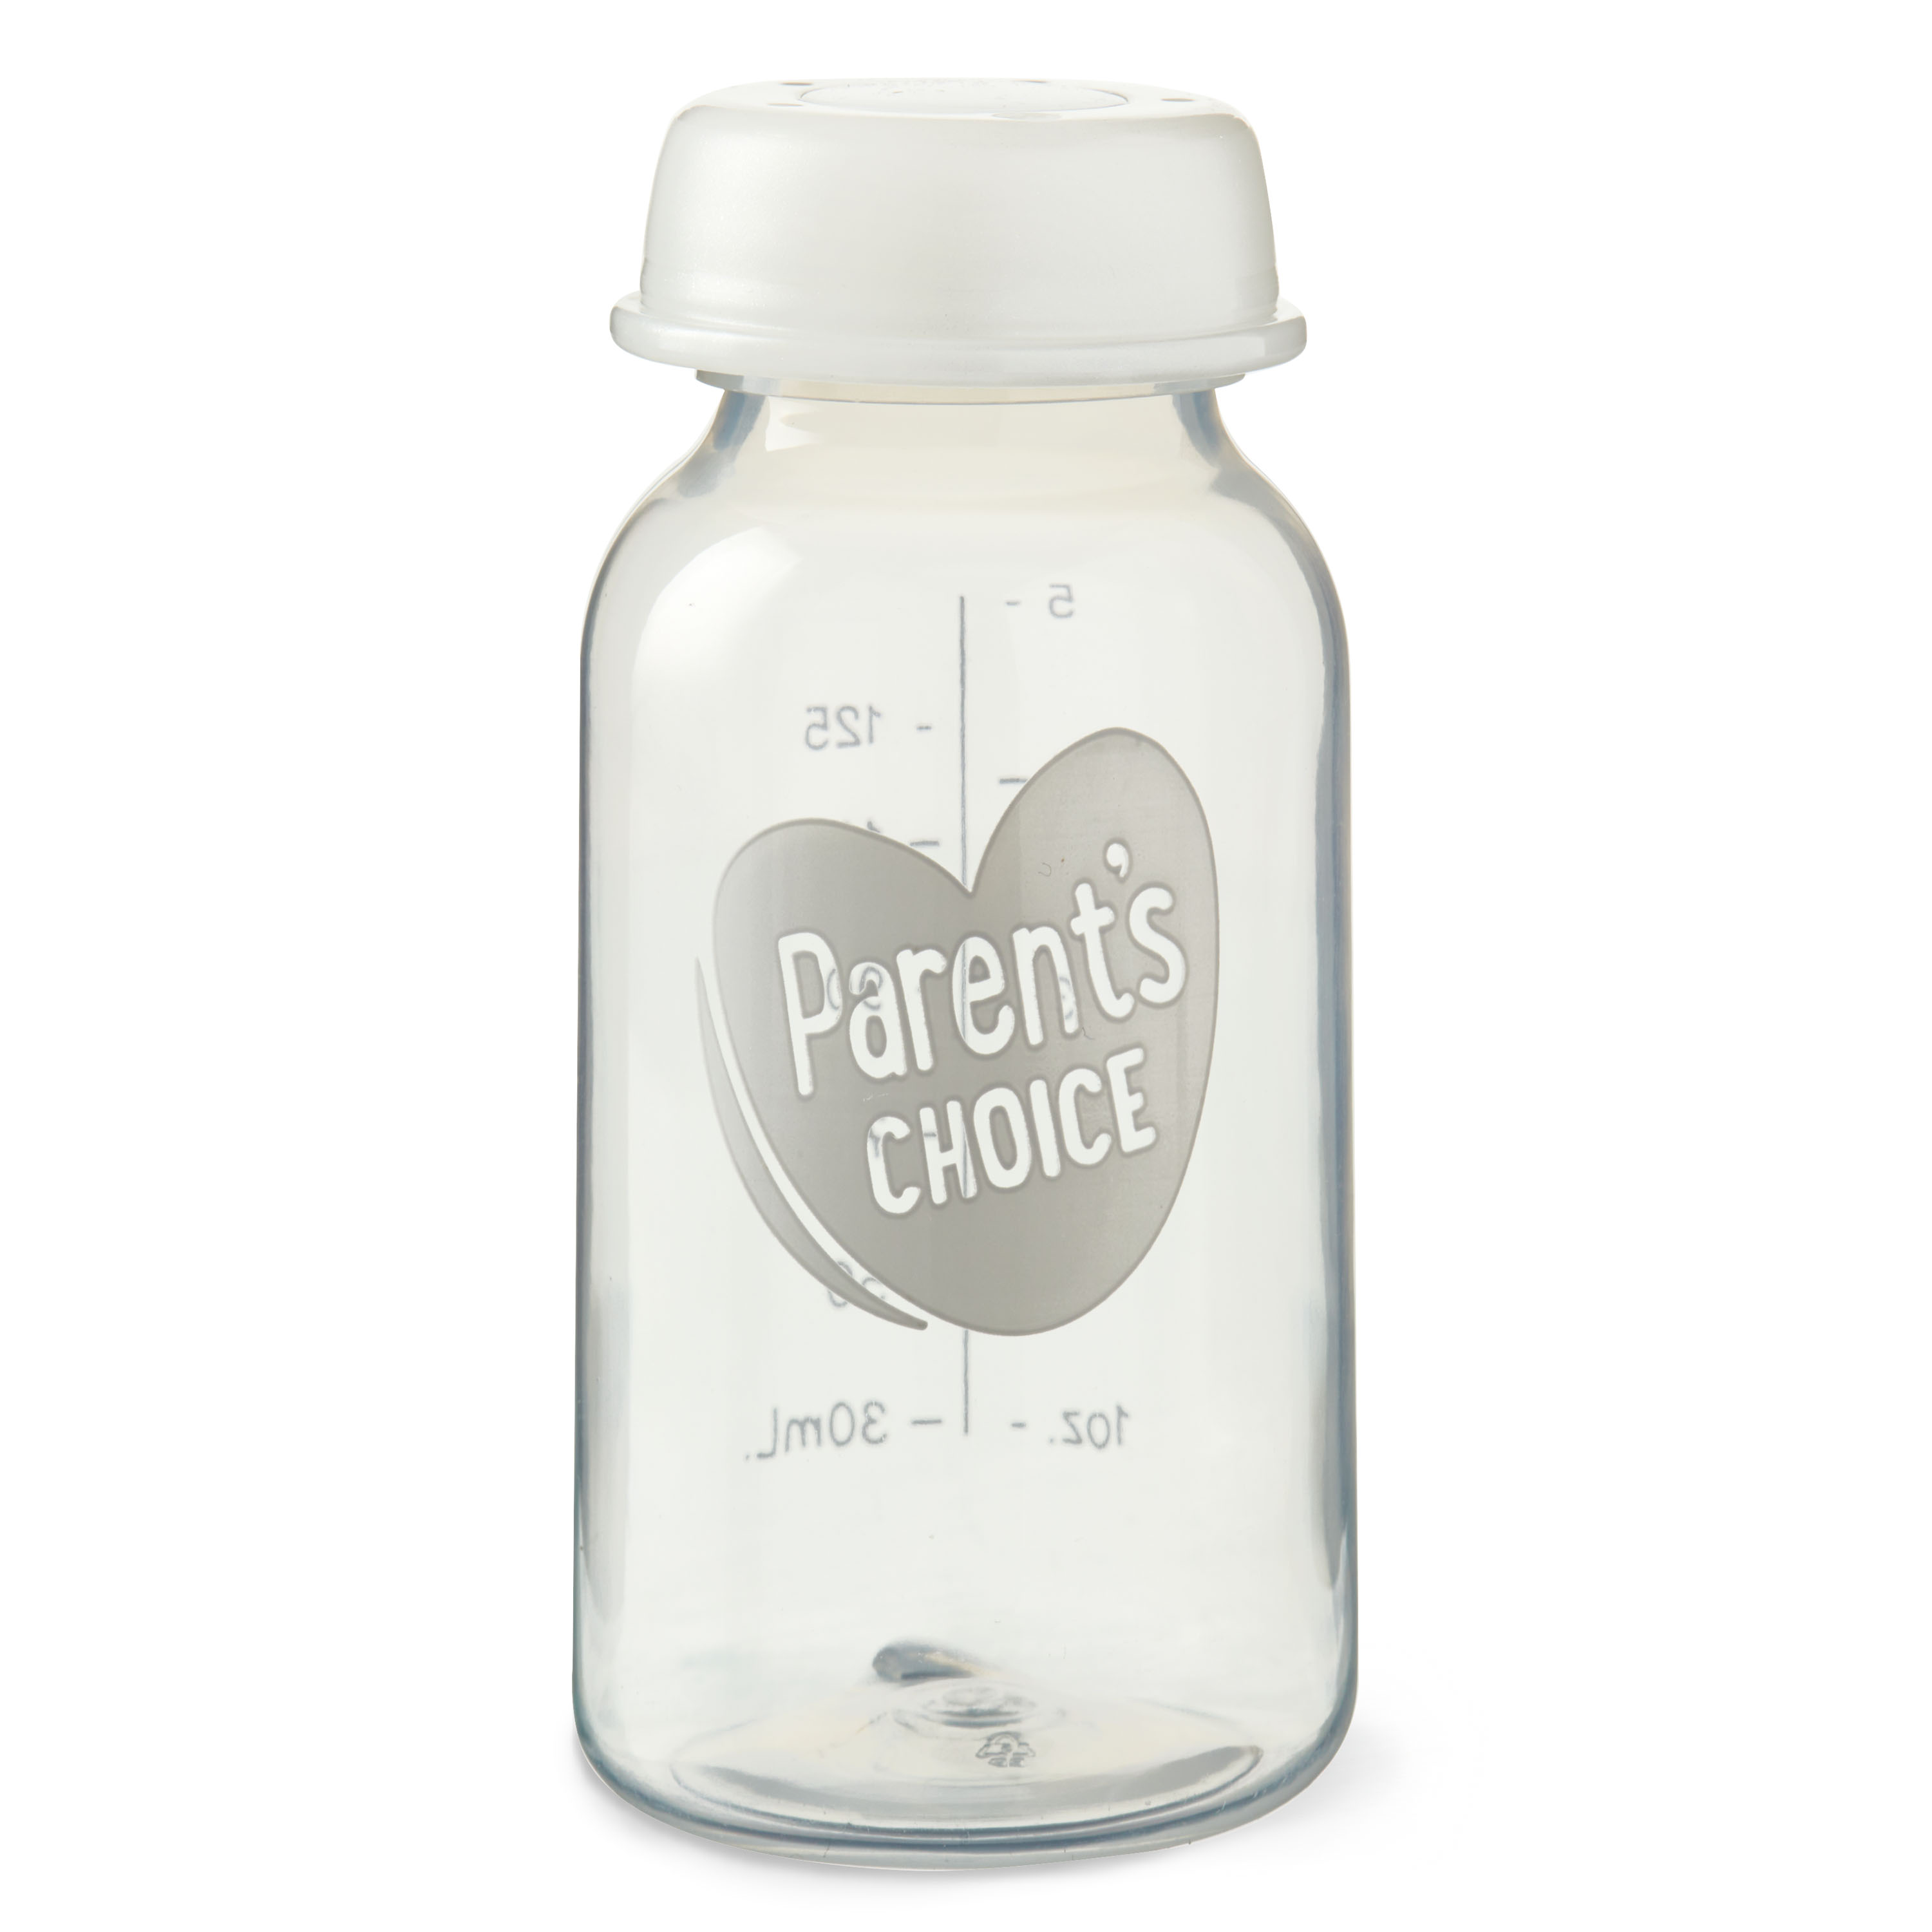 Parent's Choice Milk Storage Containers, 0+ Months, 5 fl oz, 4 Pack - image 4 of 8